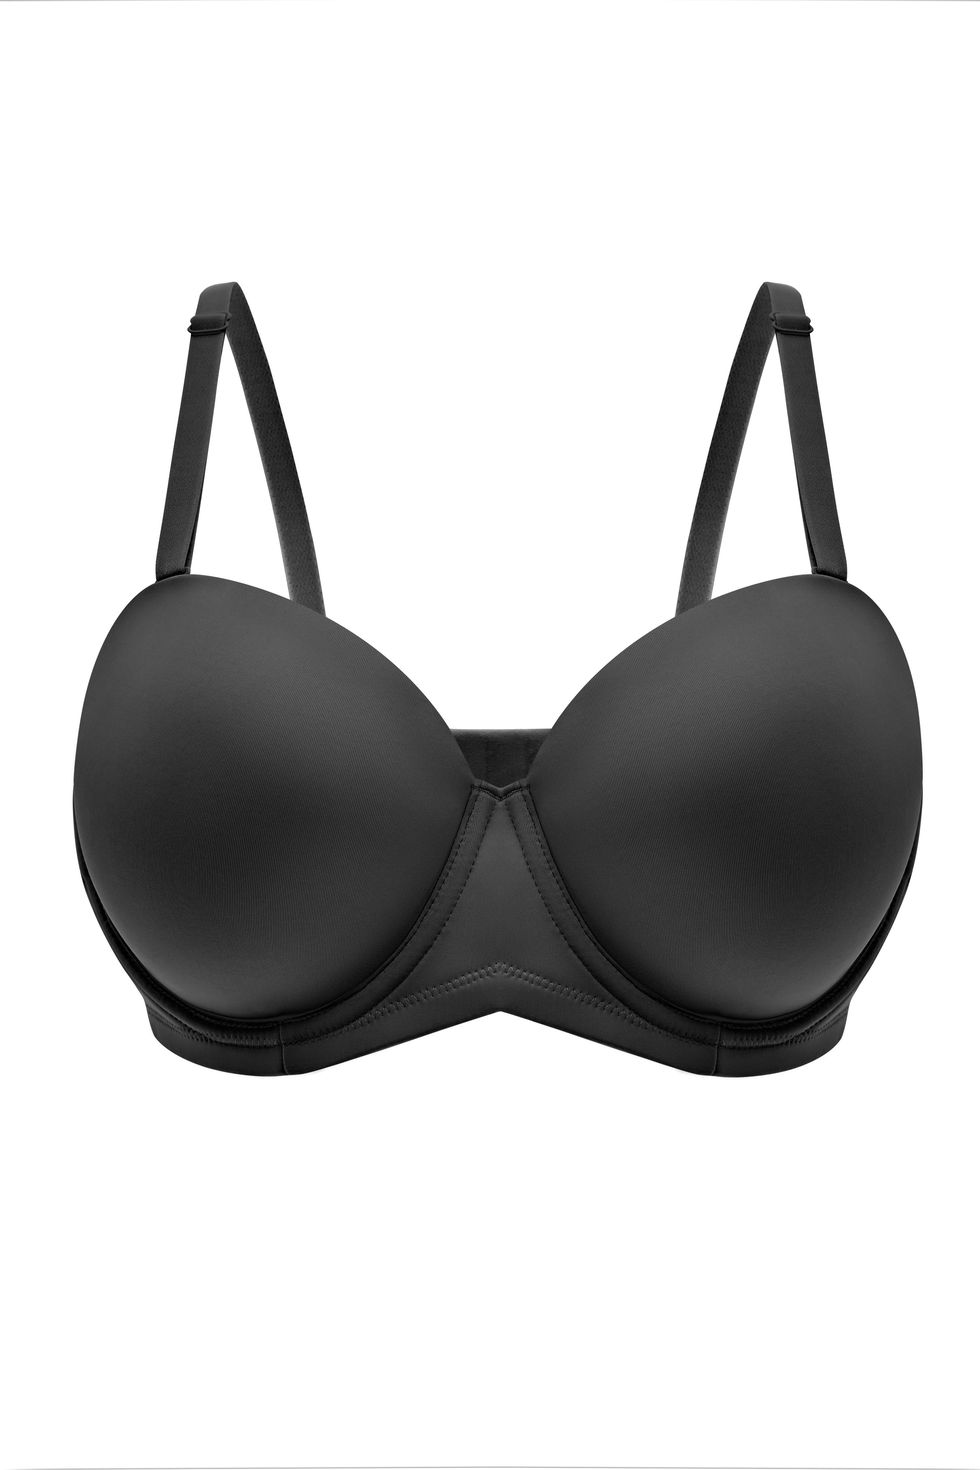 Luvlette Strapless Front-Close Push-up Bra